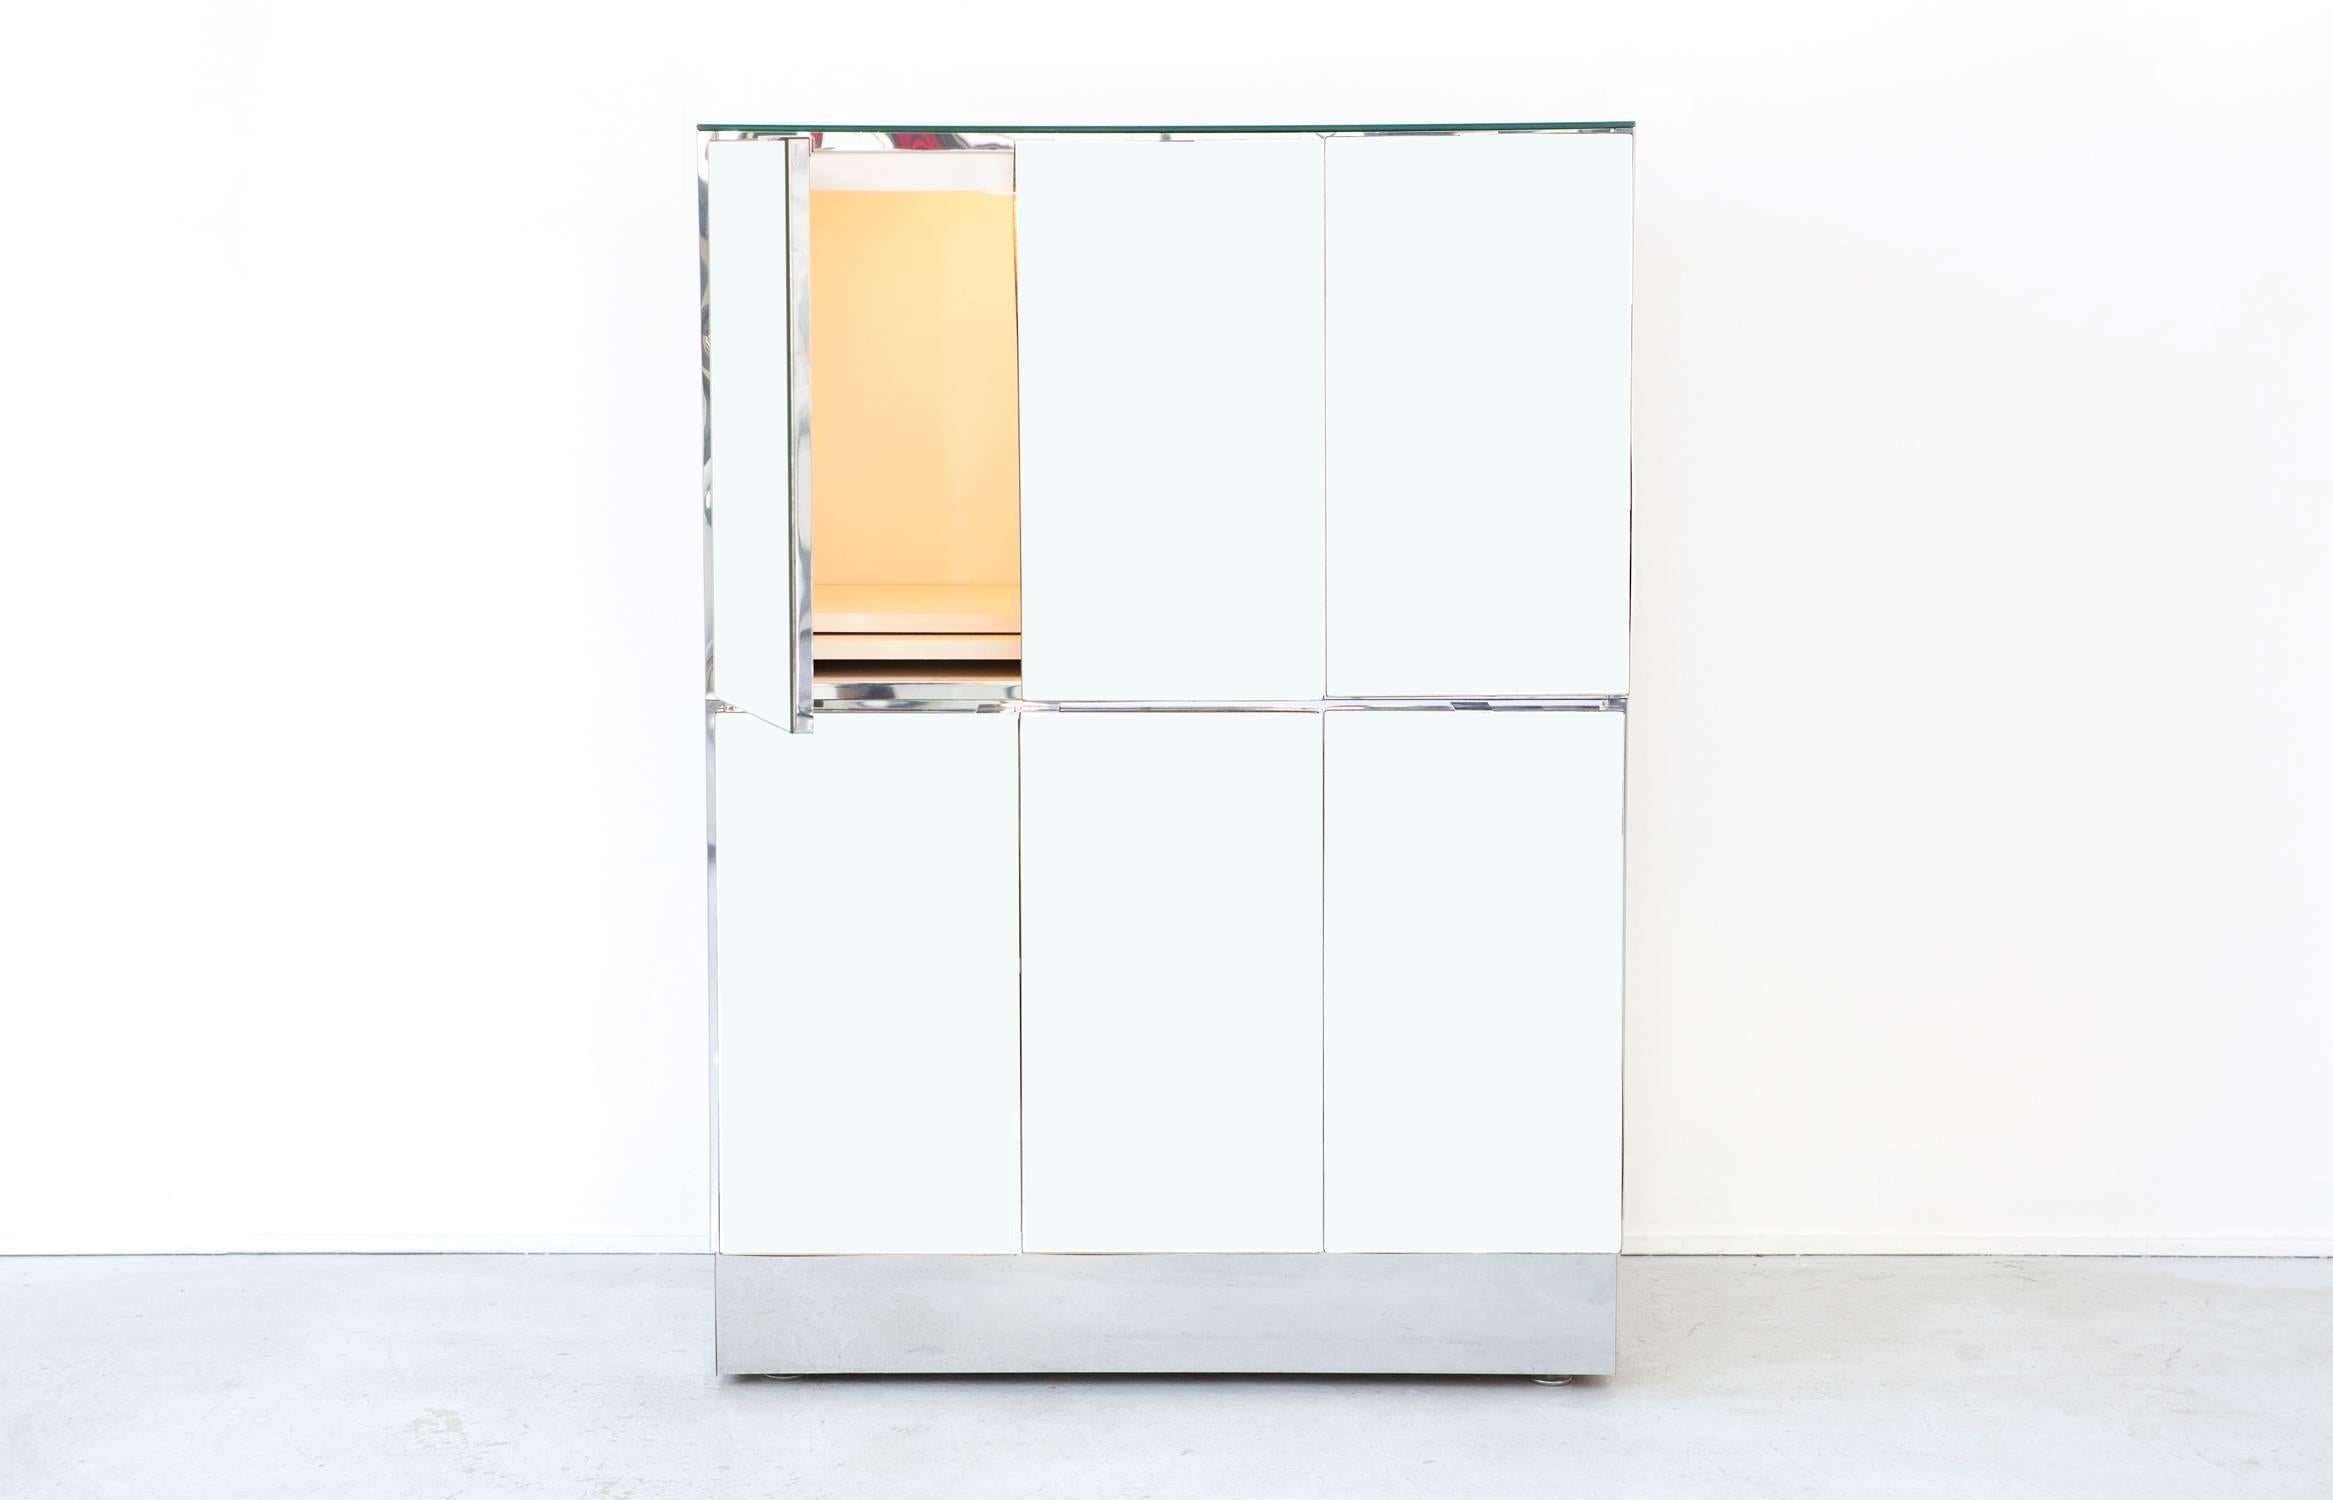 Stacking bar by Ello. 

Mirrored glass.

Measures: 50 ⅜